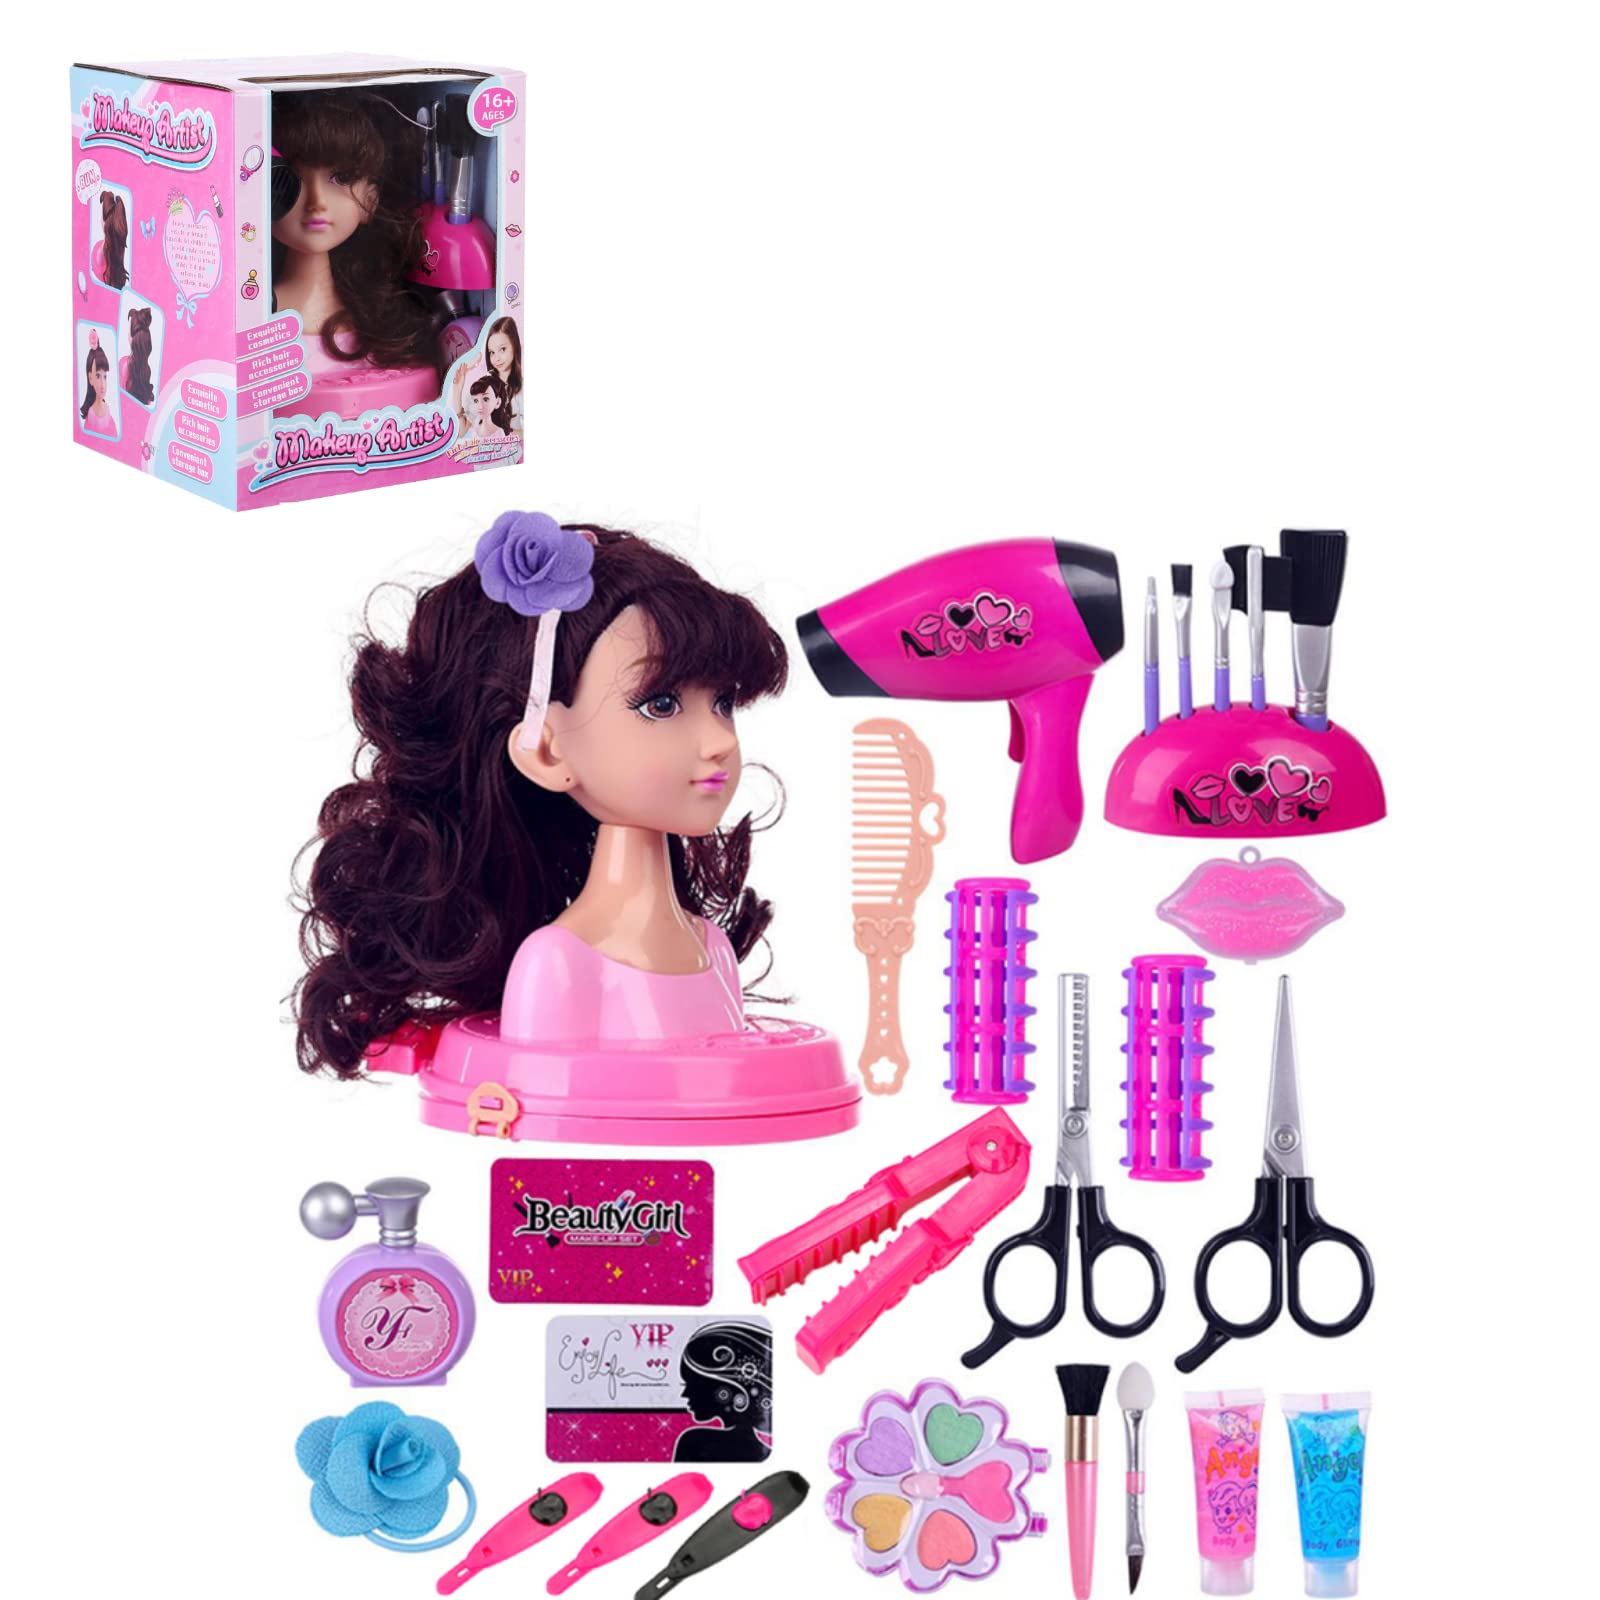 Topoo Styling Head Doll for Girls, Makeup Hairstyle Pretend Play Set with Styling Accessories for Kids Type C